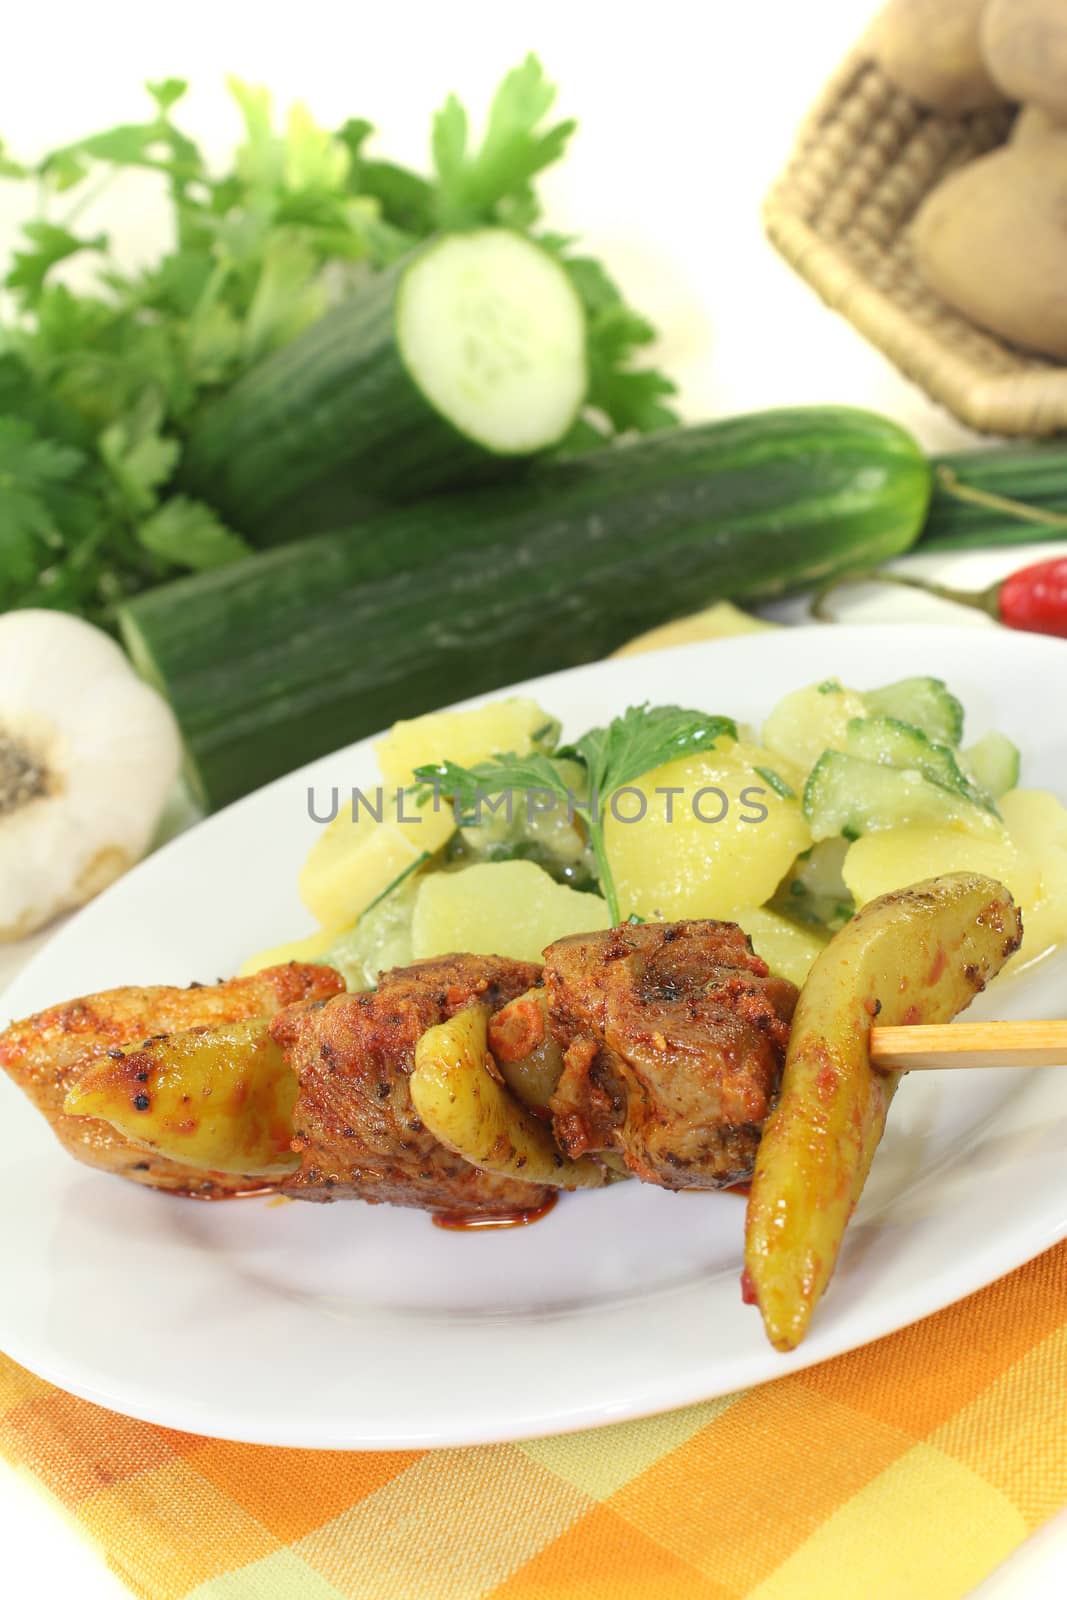 Potato-cucumber salad with fire skewers and chilli on a light background